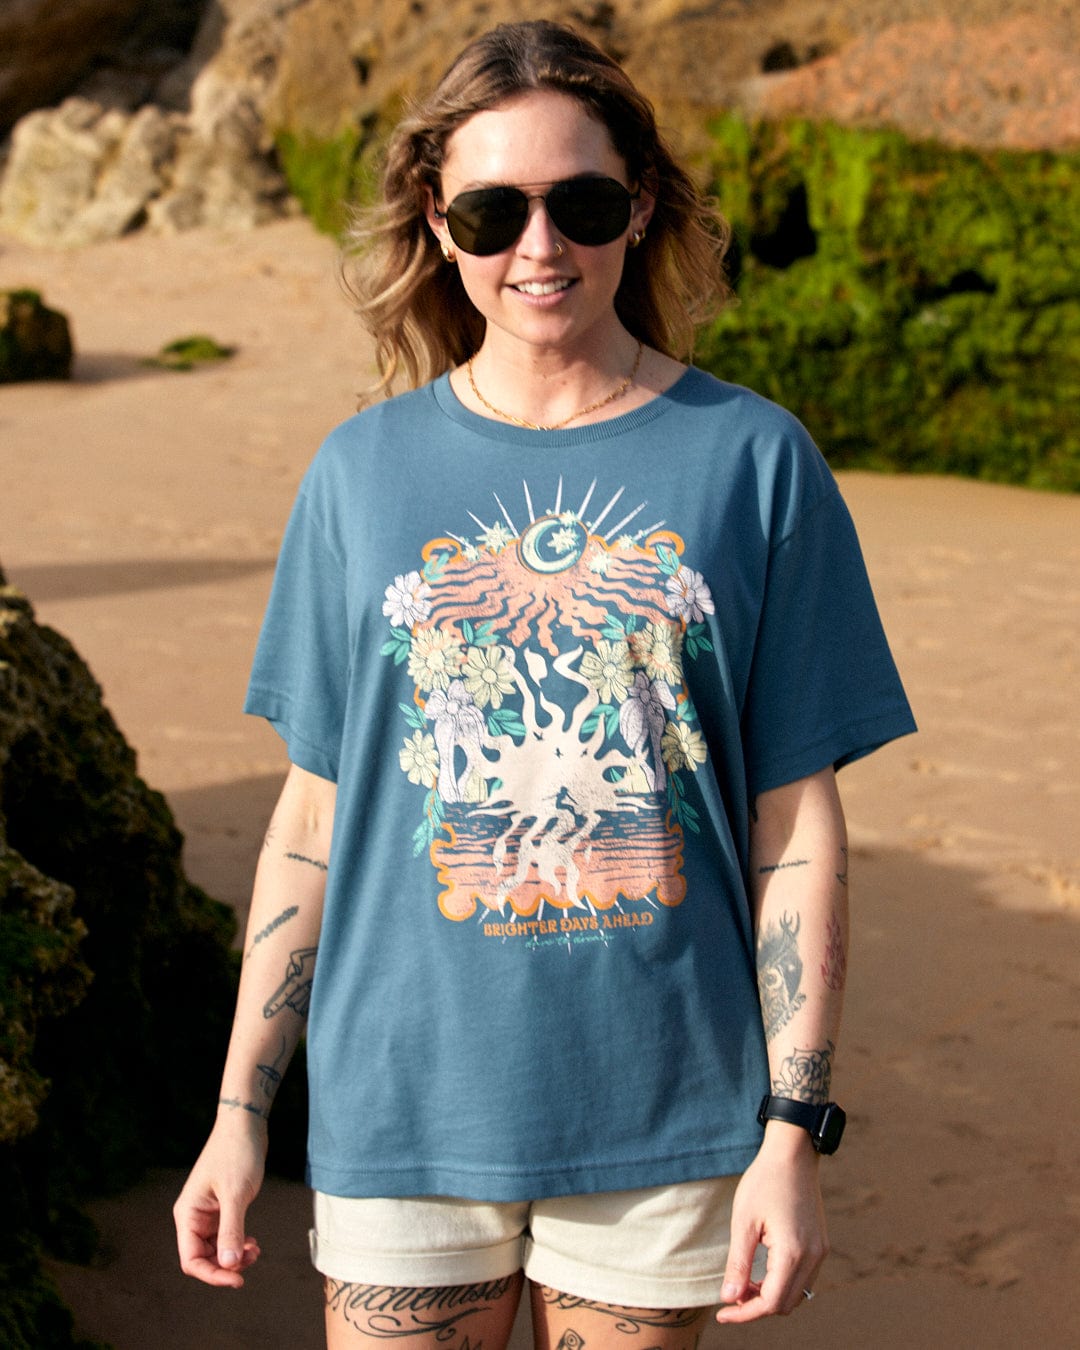 A woman in sunglasses stands on a sandy beach, wearing a blue Saltrock t-shirt with a colorful floral surfing luna graphic and denim shorts.